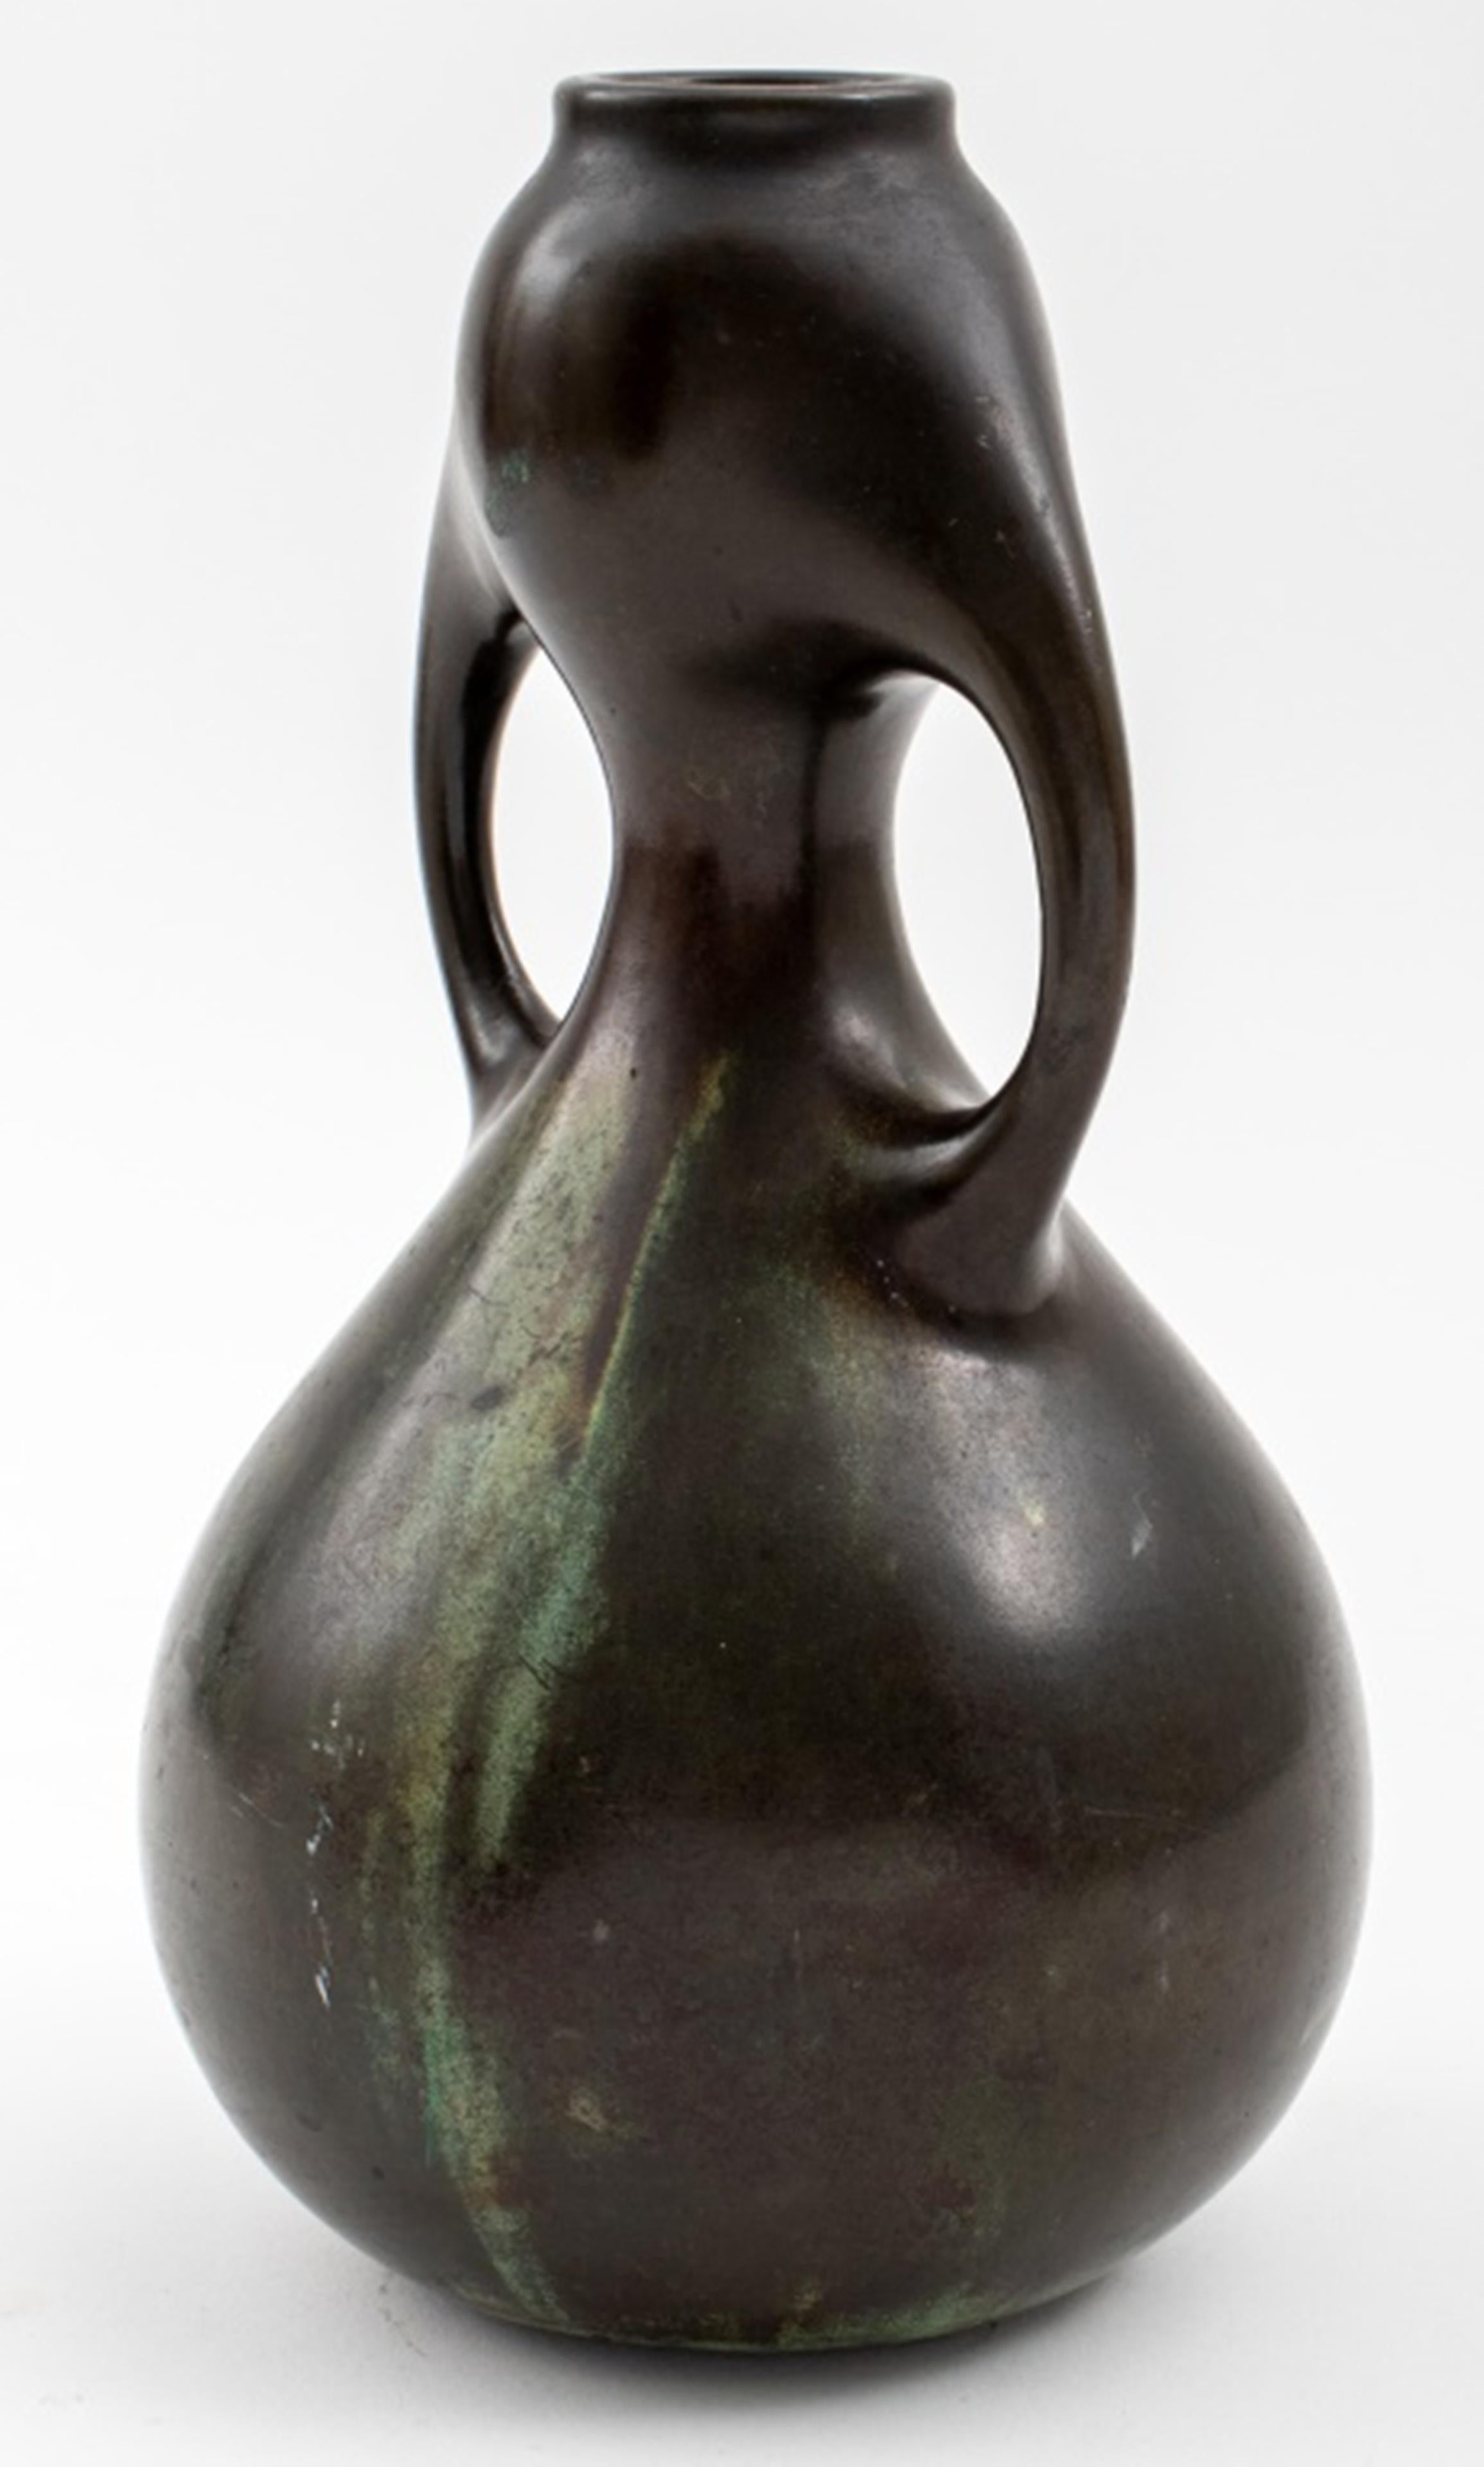 Attributed to Hasegawa Gasen (Japanese, 1901-1994), Showa period (1926-1989) patinated bronze Ikebana vase, in a stylized double-gourd form with the narrow neck above two handles, the whole in green-splashed chocolate brown patina. Measures: 9.75